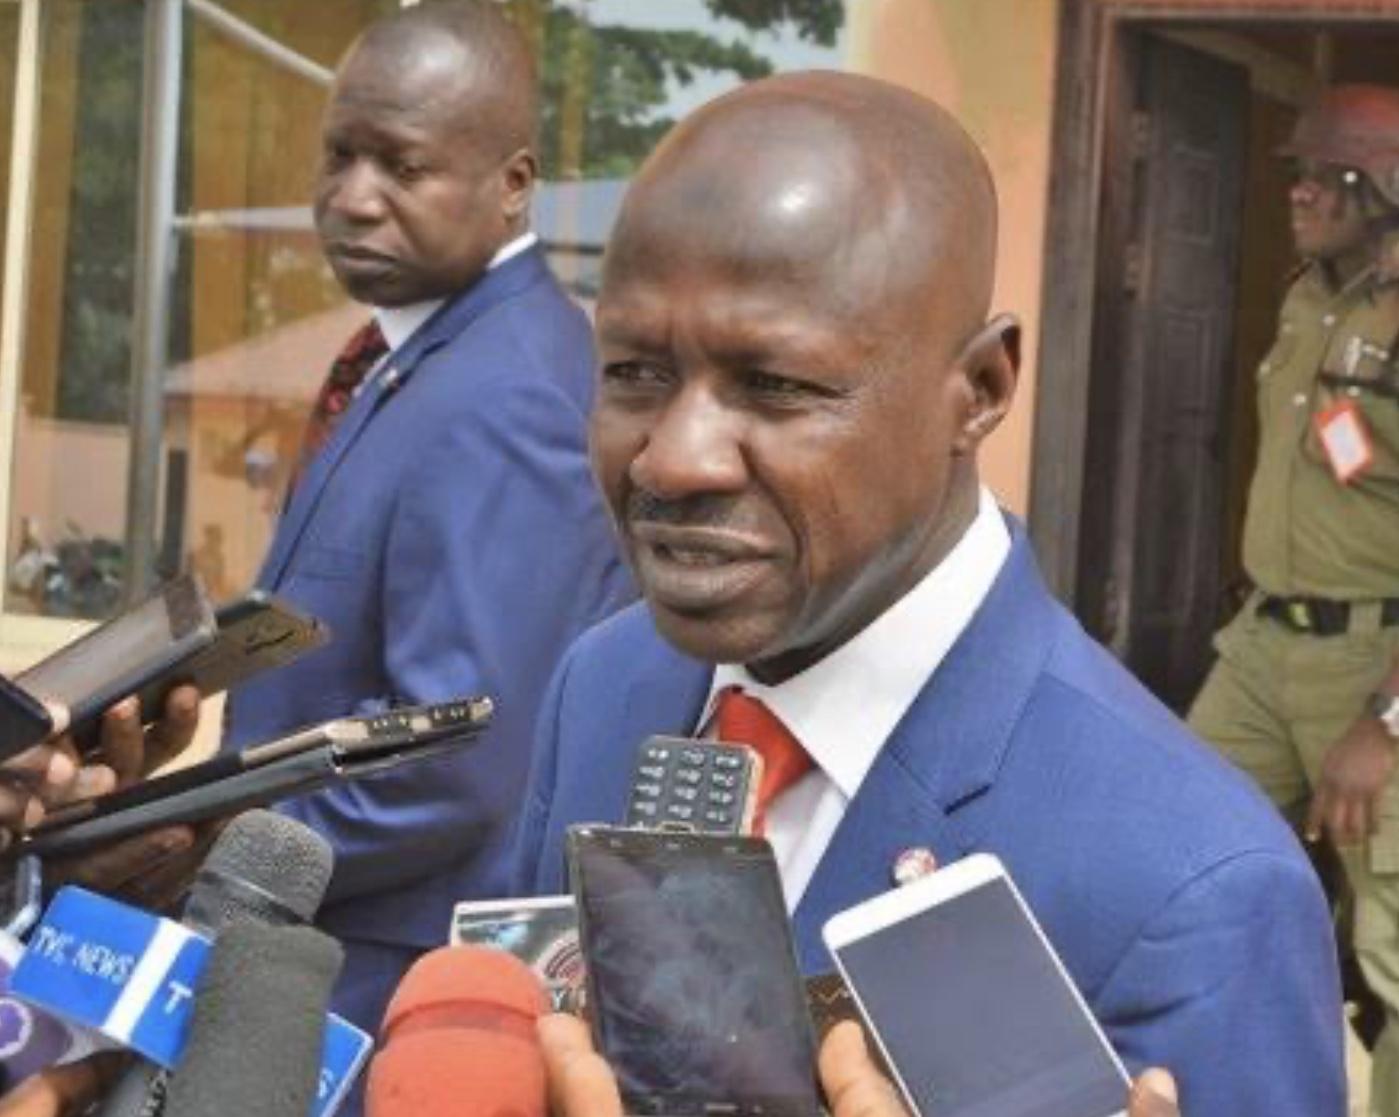 Wahab Shittu, the lawyer of the suspended Chairman of the Economic and Financial Crimes Commissions, EFCC, Ibrahim Magu, confirmed the release of his client by the presidential panel investigating him.